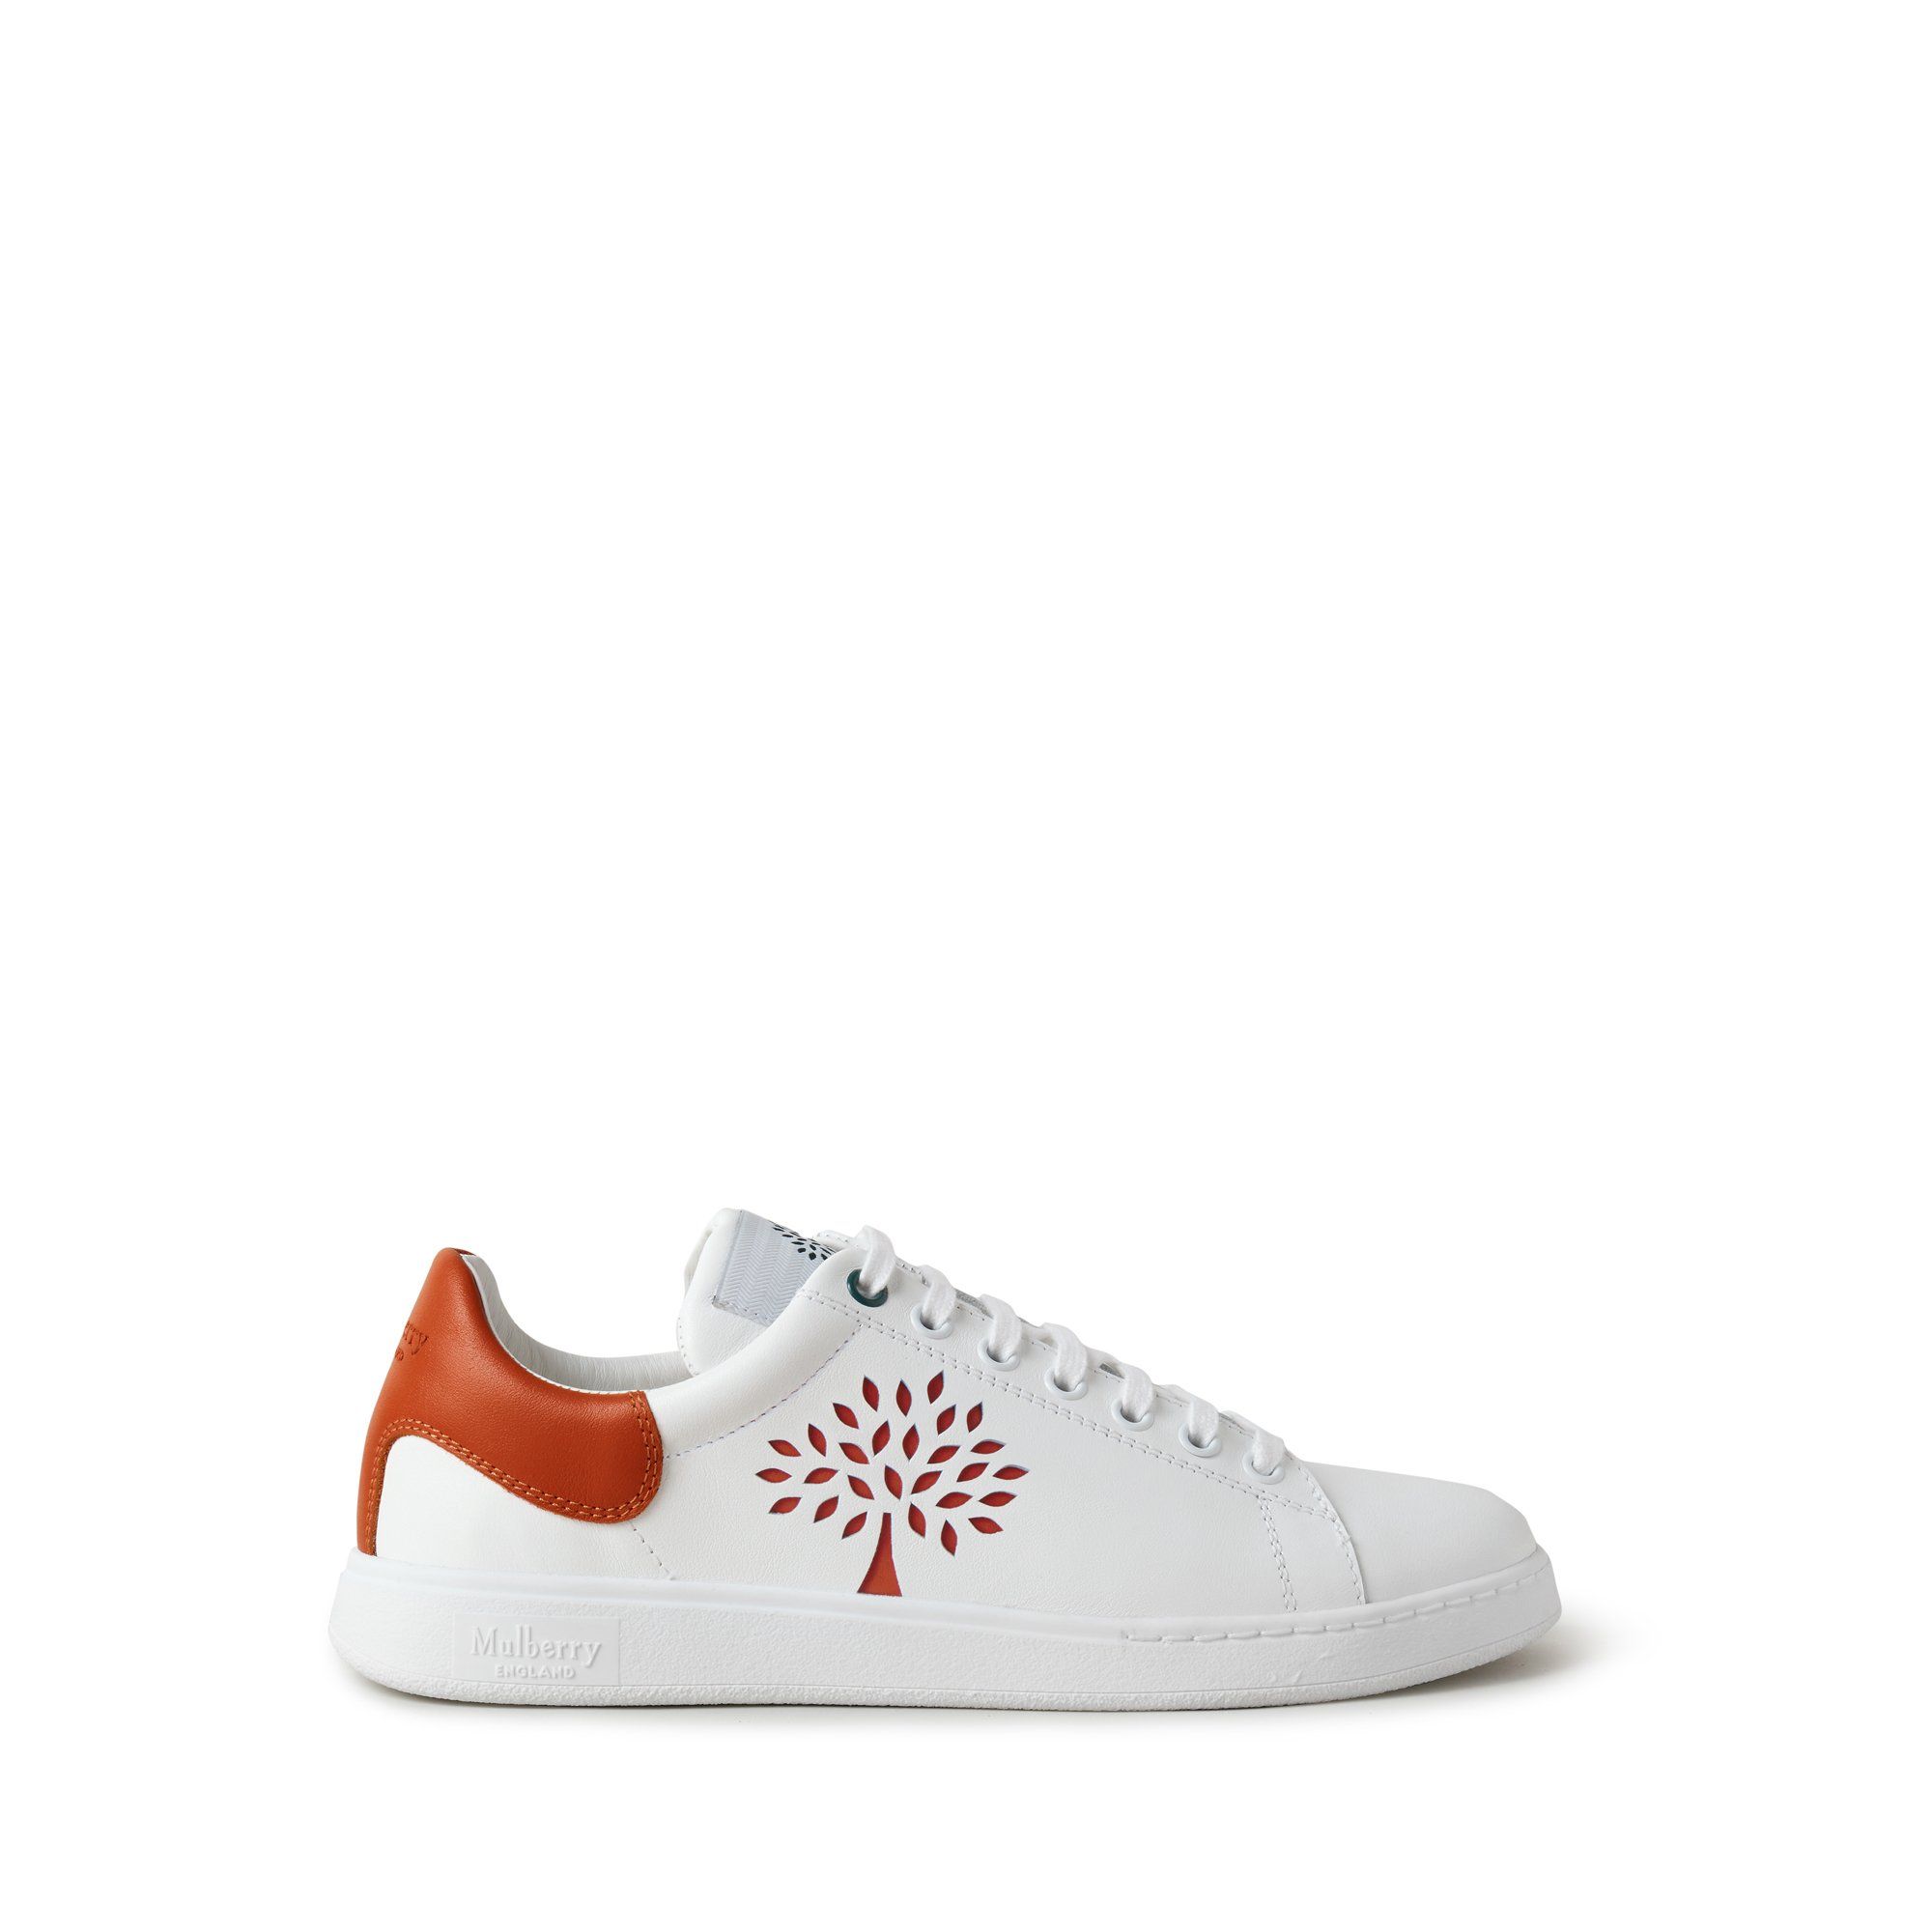 Mulberry Tree Tennis Trainers In Coral Orange